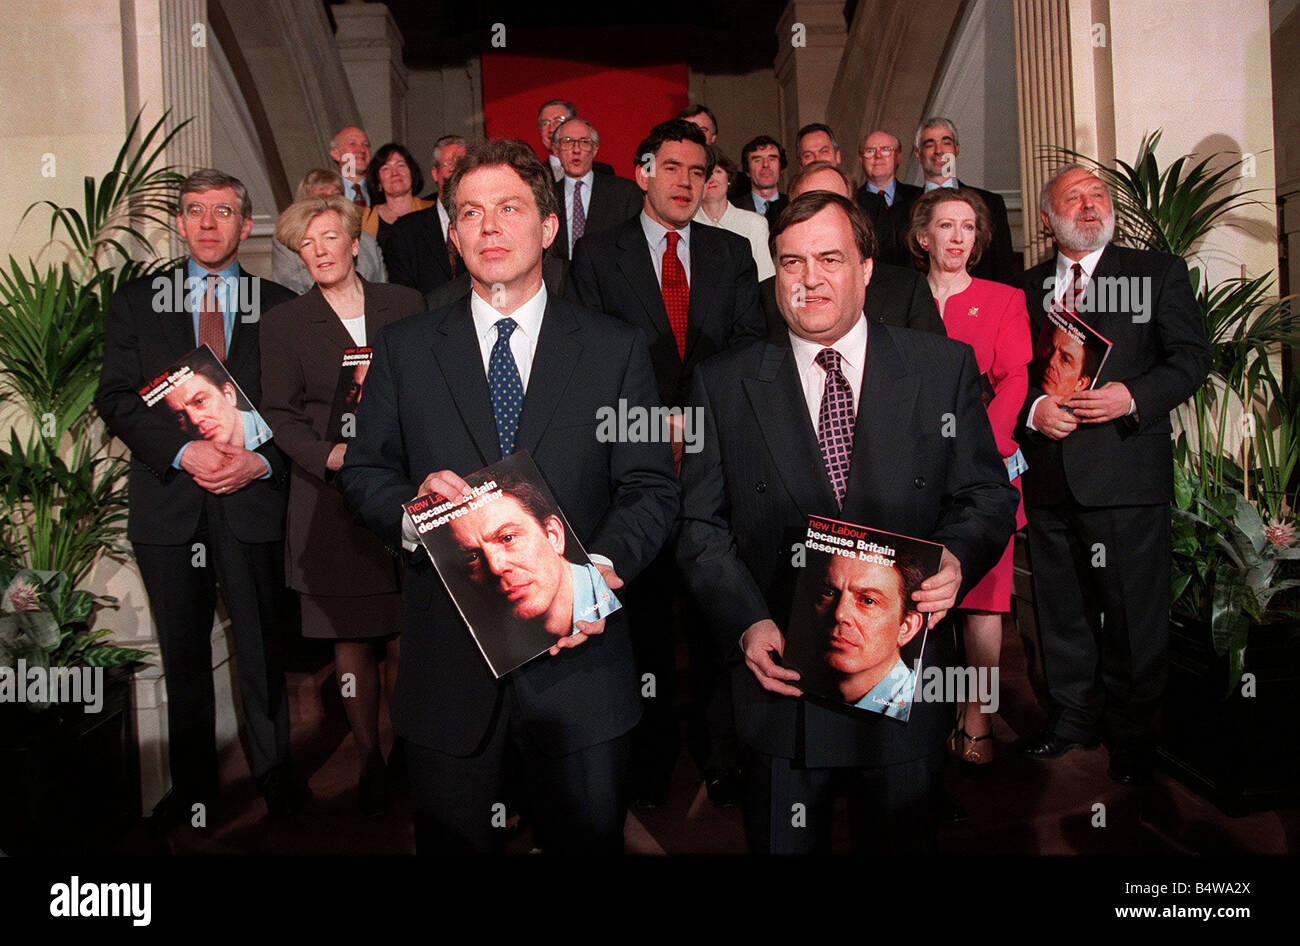 Tony Blair And Shadow Cabinet Launch Their Manifesto For The